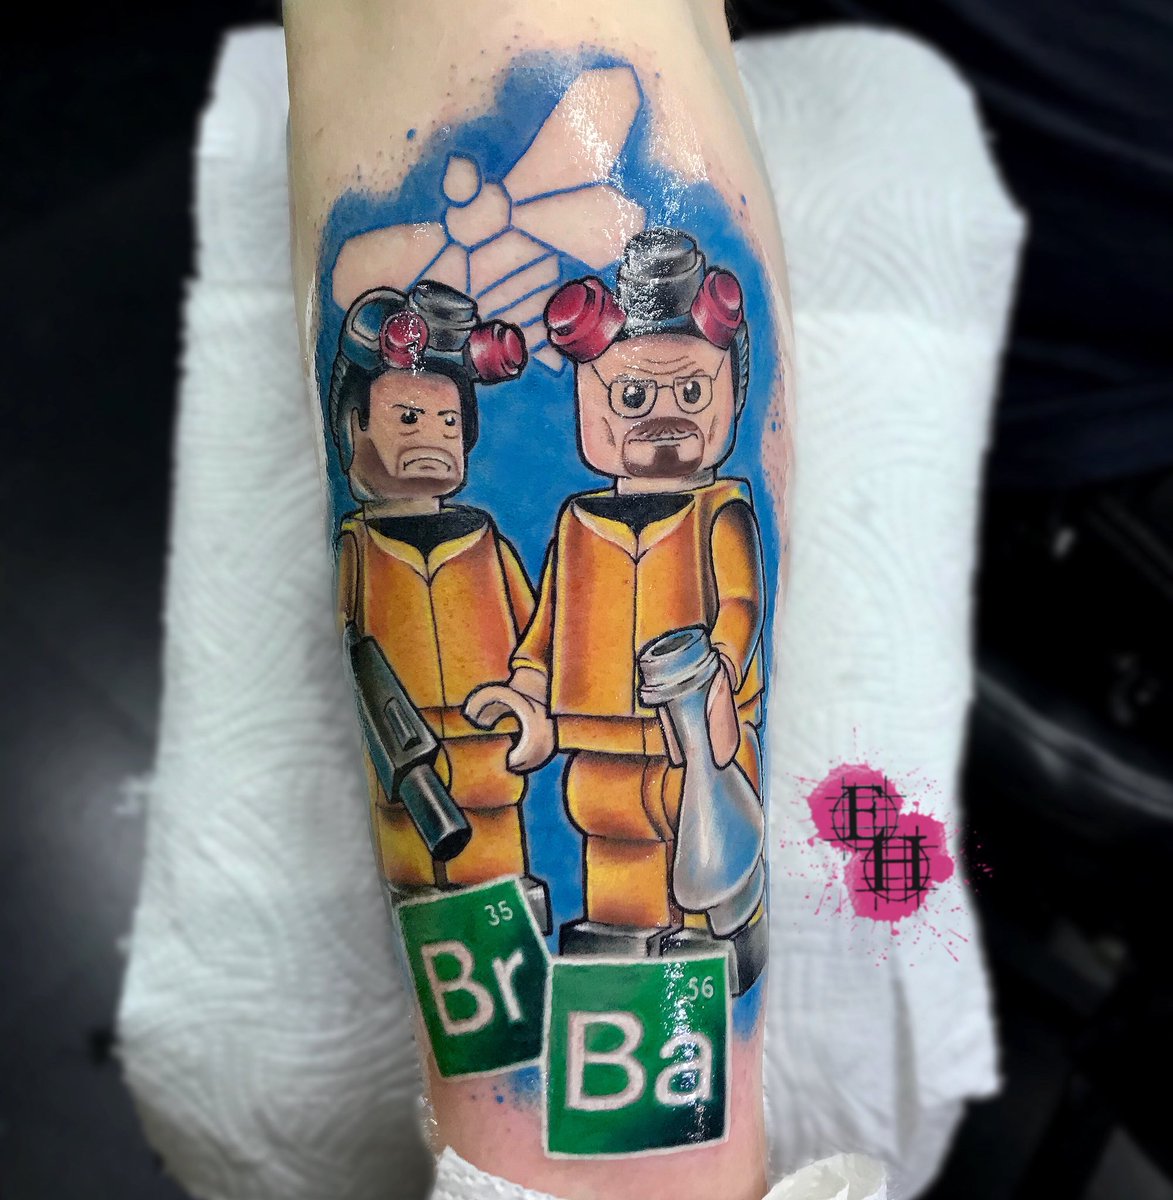 I just realized where Jesses tattoo is from  rbreakingbad